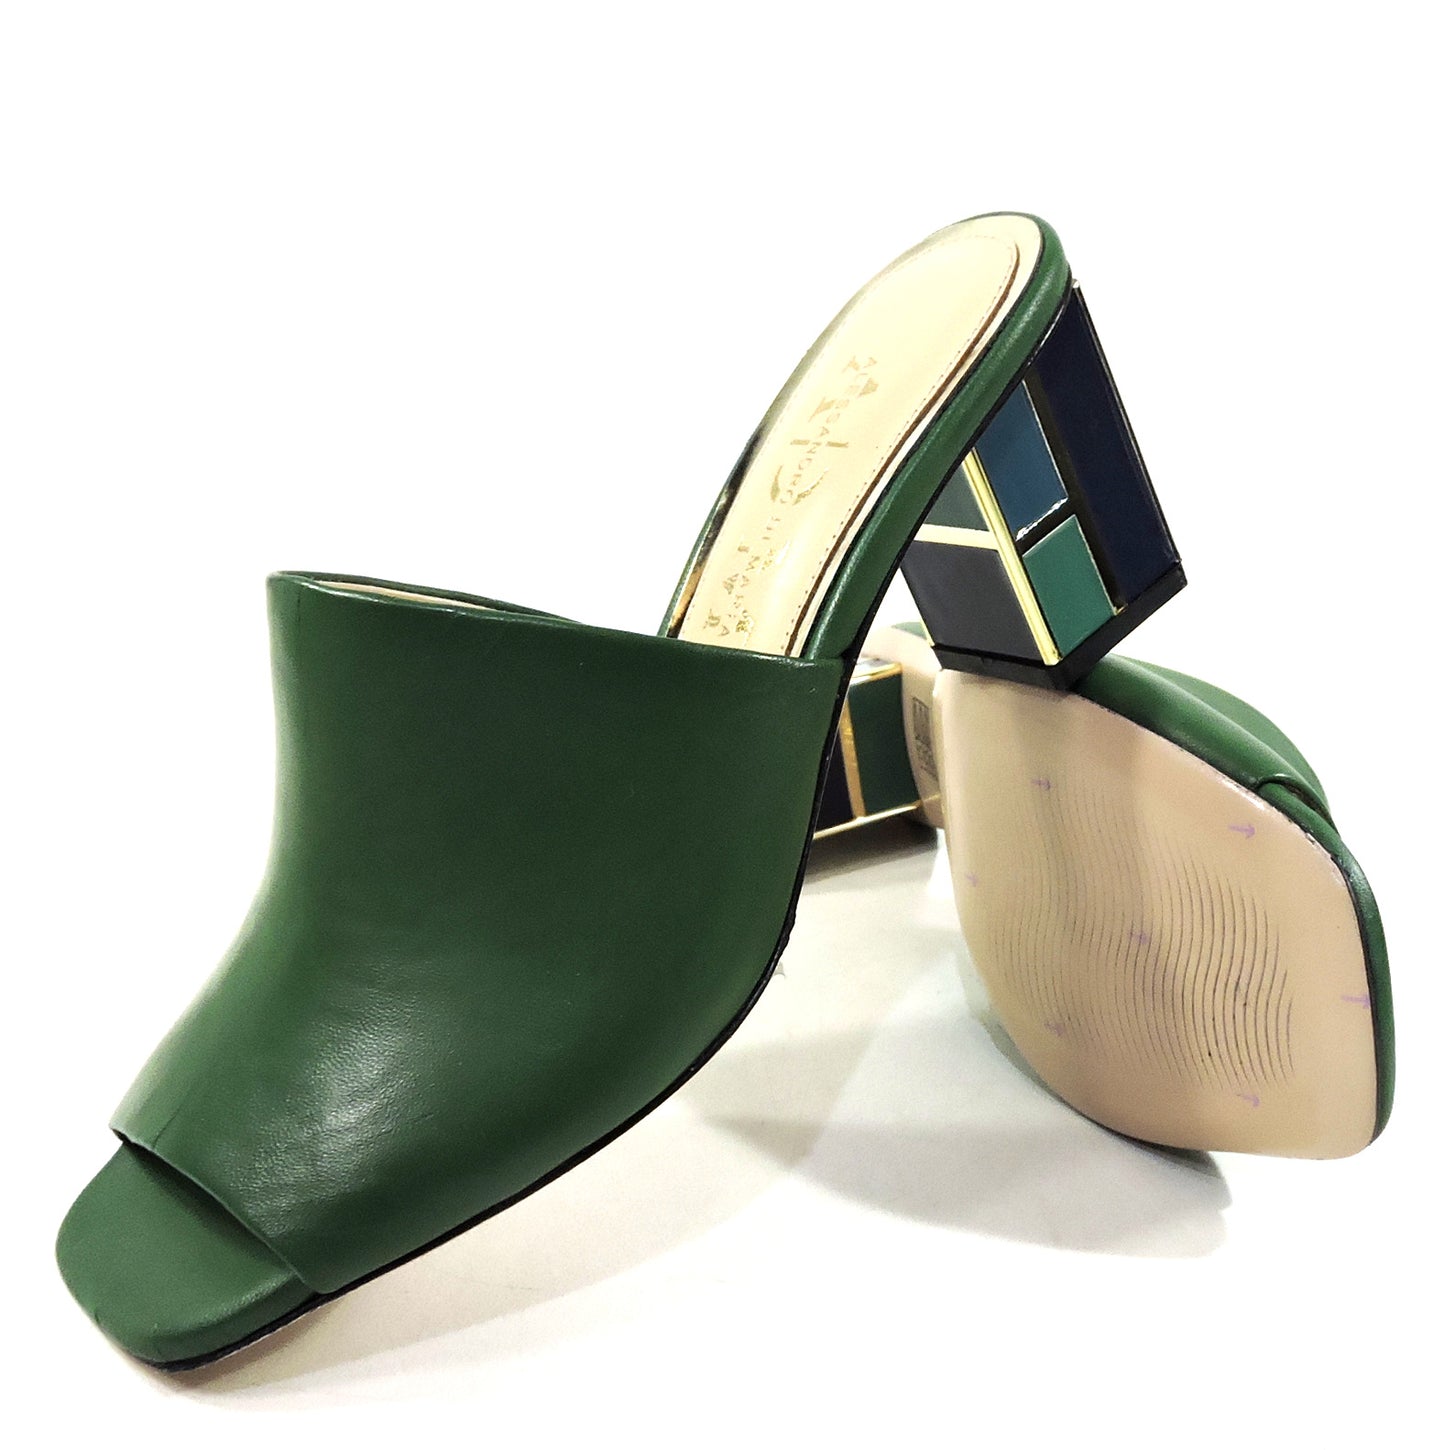 ALESSANDRO DI MARIA 🇮🇹 WOMEN'S GREEN SOFT LEATHER SUMMER MULES